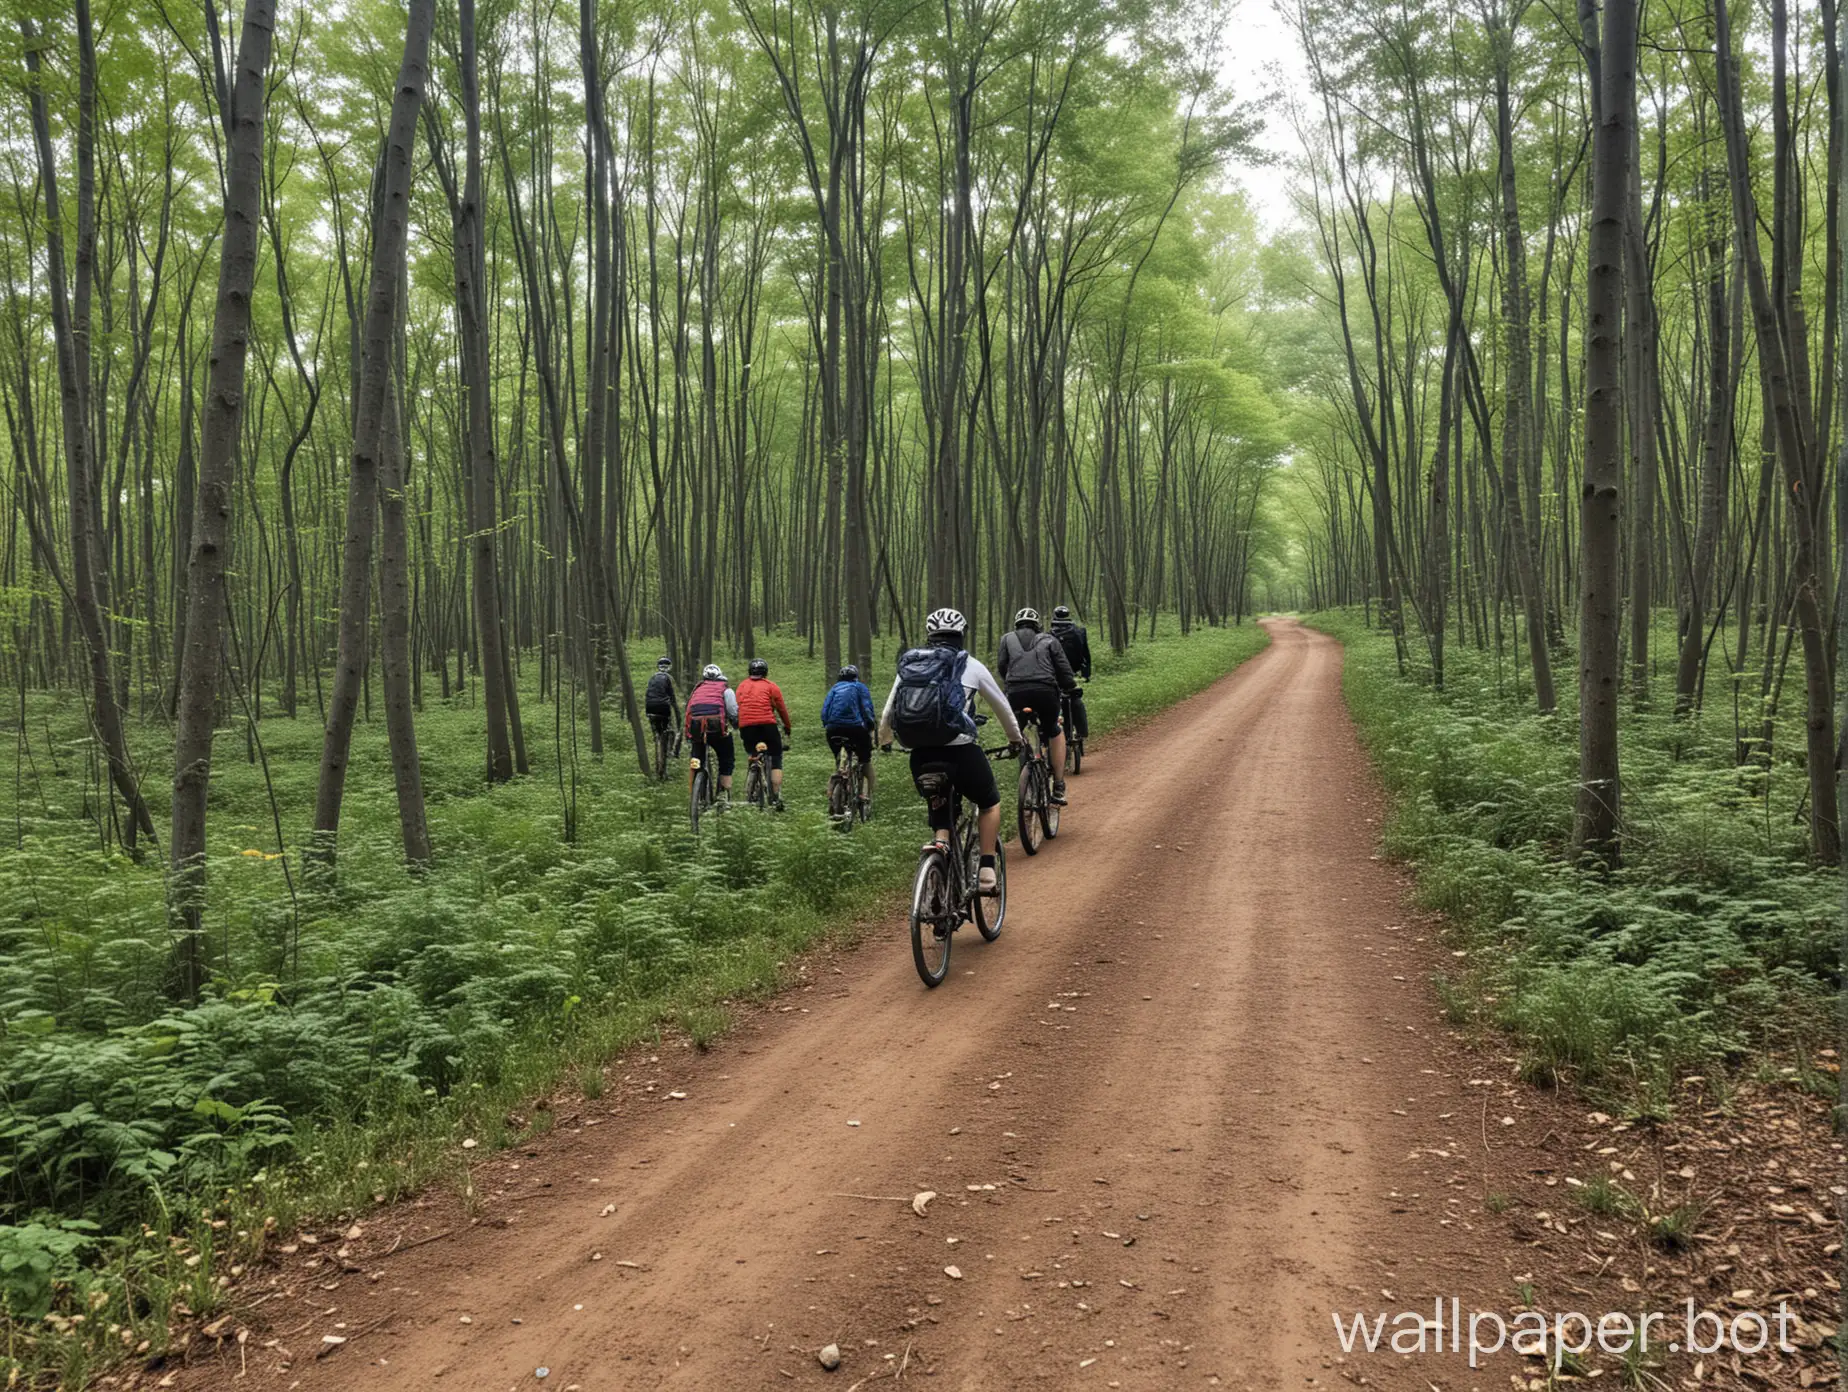 Sometimes I go out into nature, gather everyone and go for a ride!